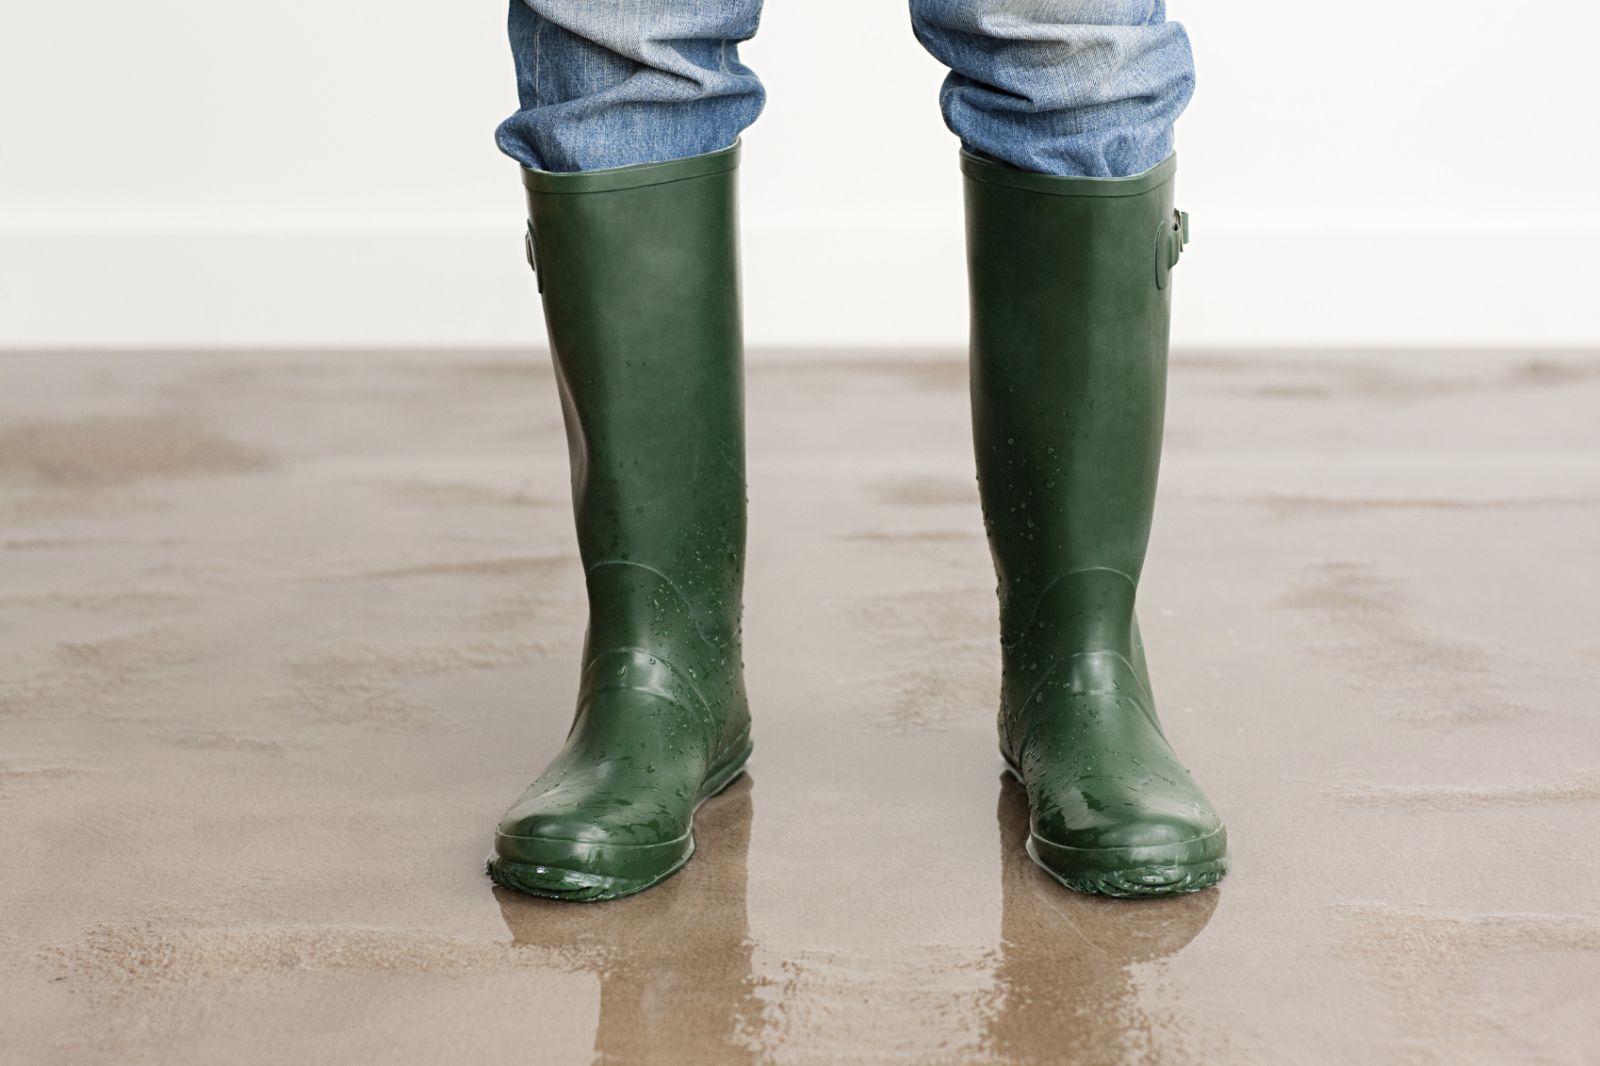 Green boots standing in water